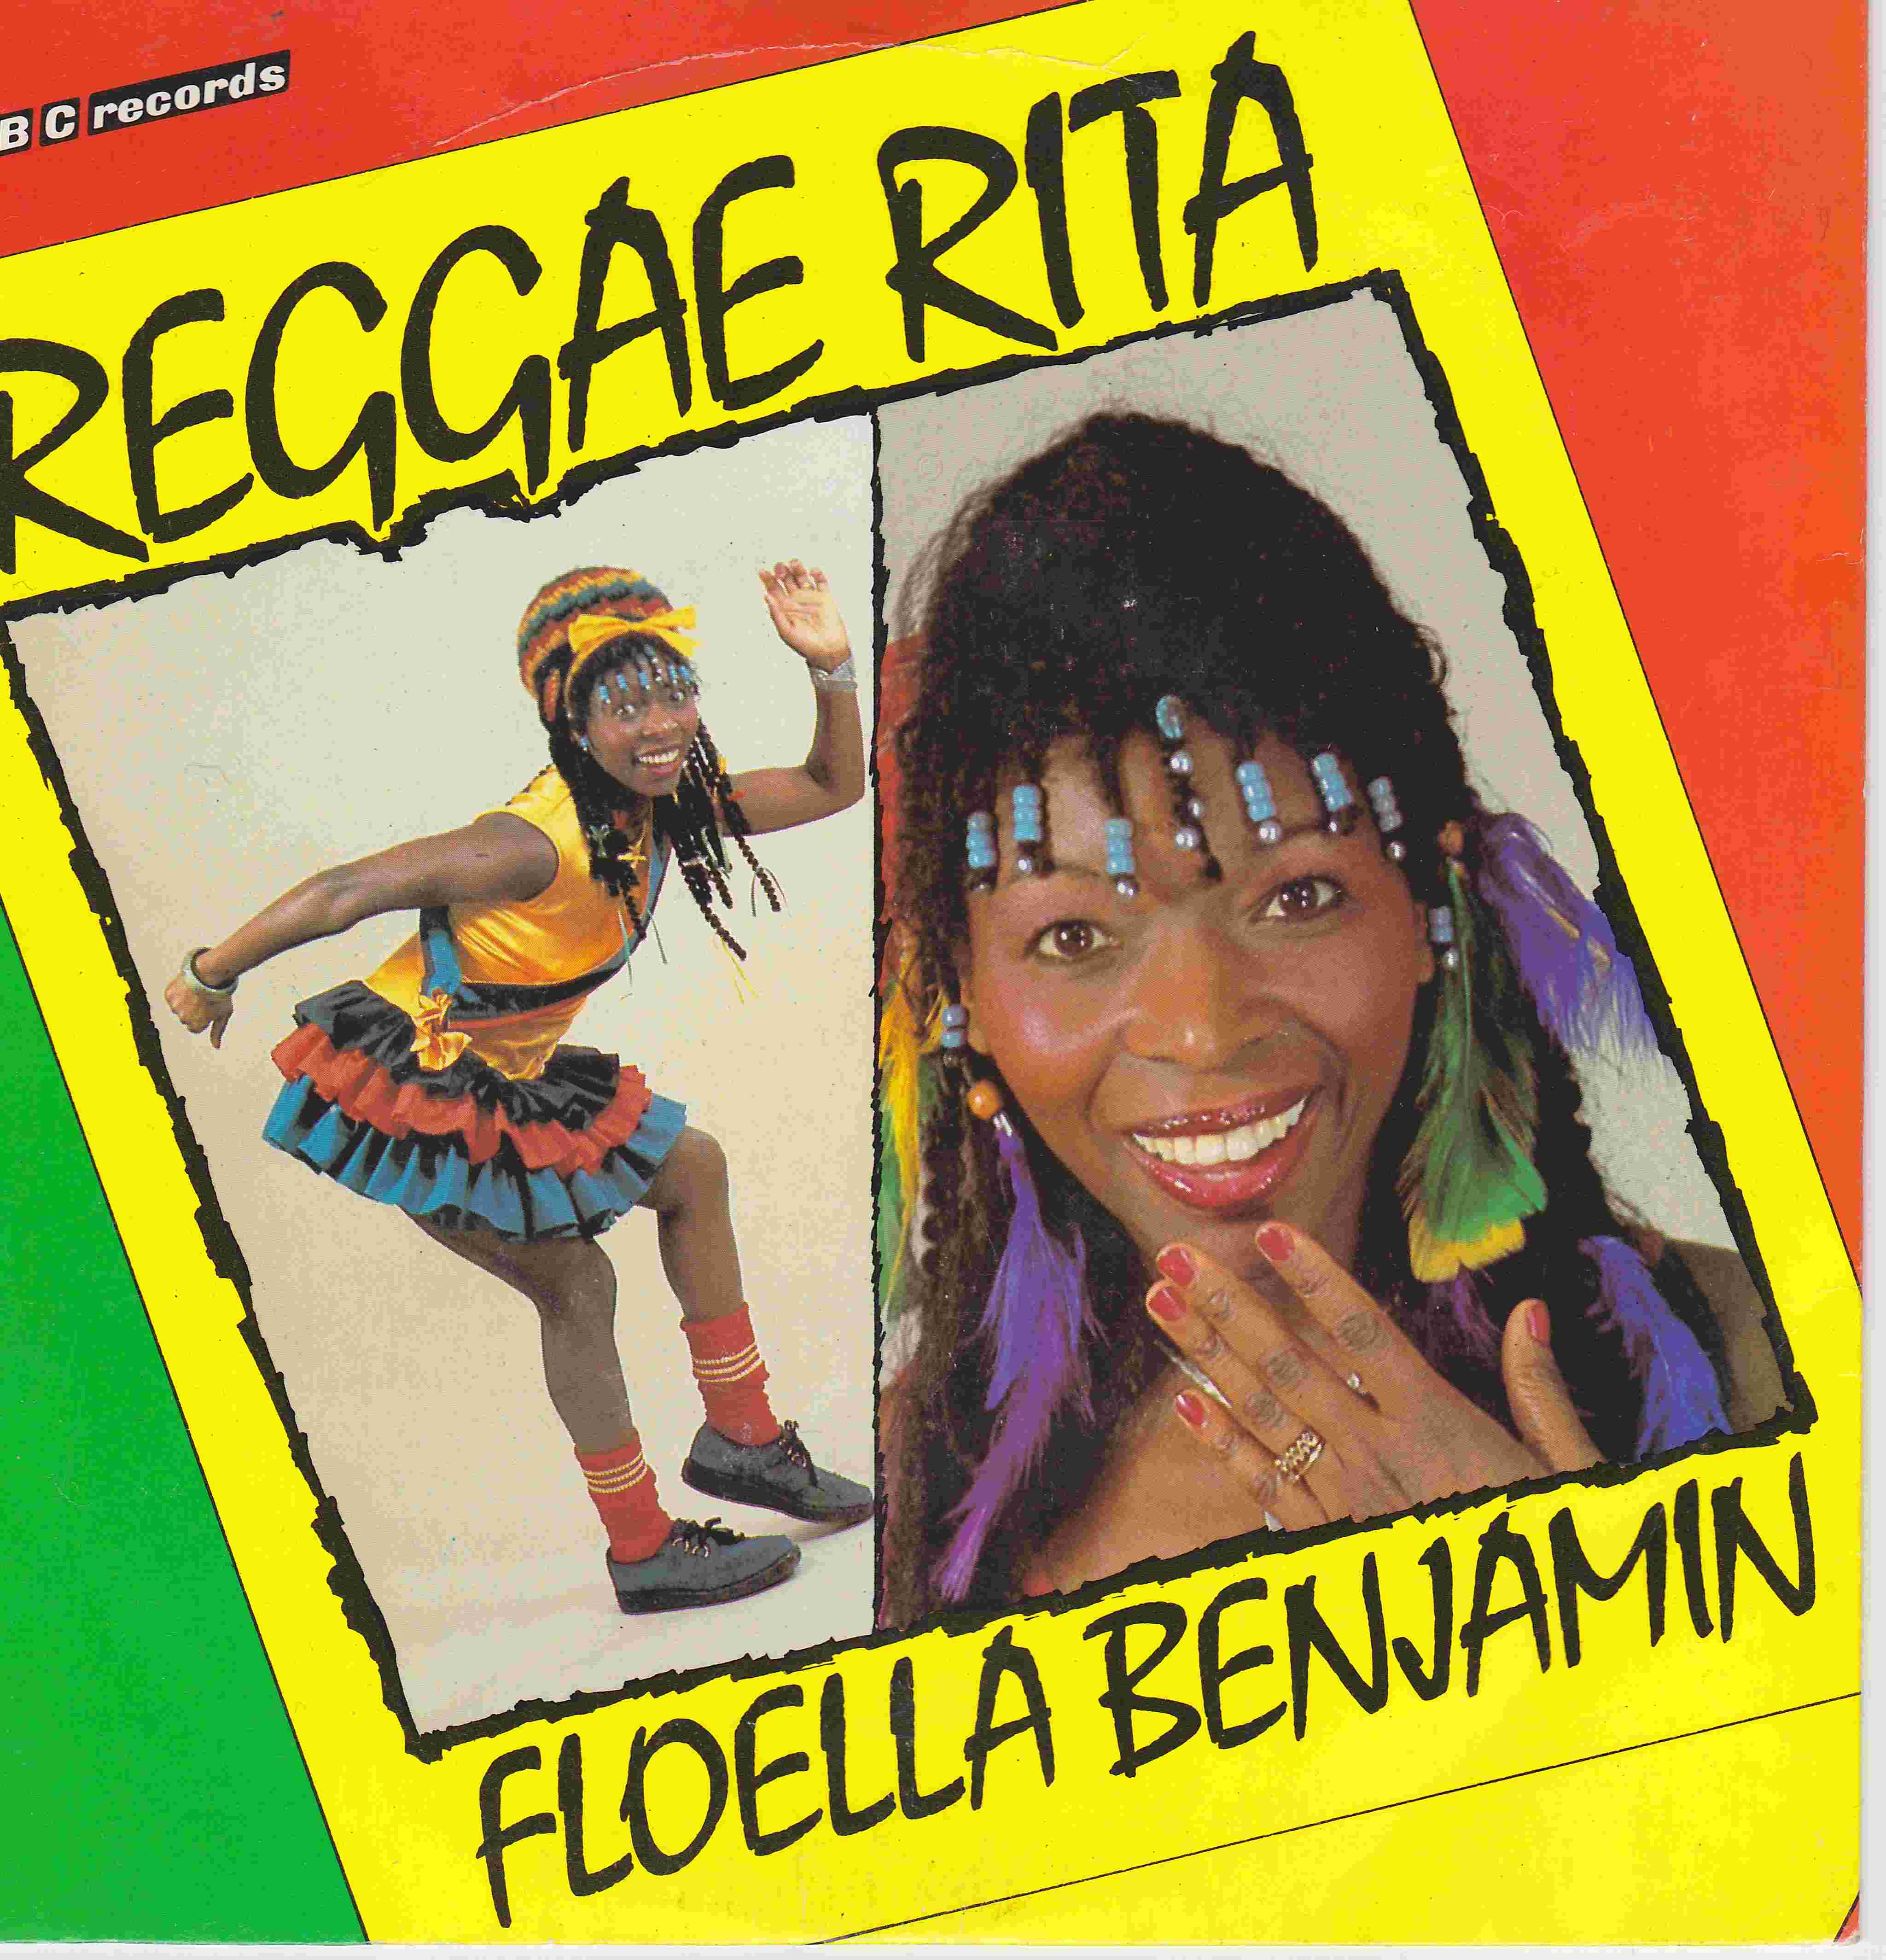 Picture of RESL 142 Reggae Rita by artist Floella Benjamin / Dr. Dread Gosling from the BBC records and Tapes library